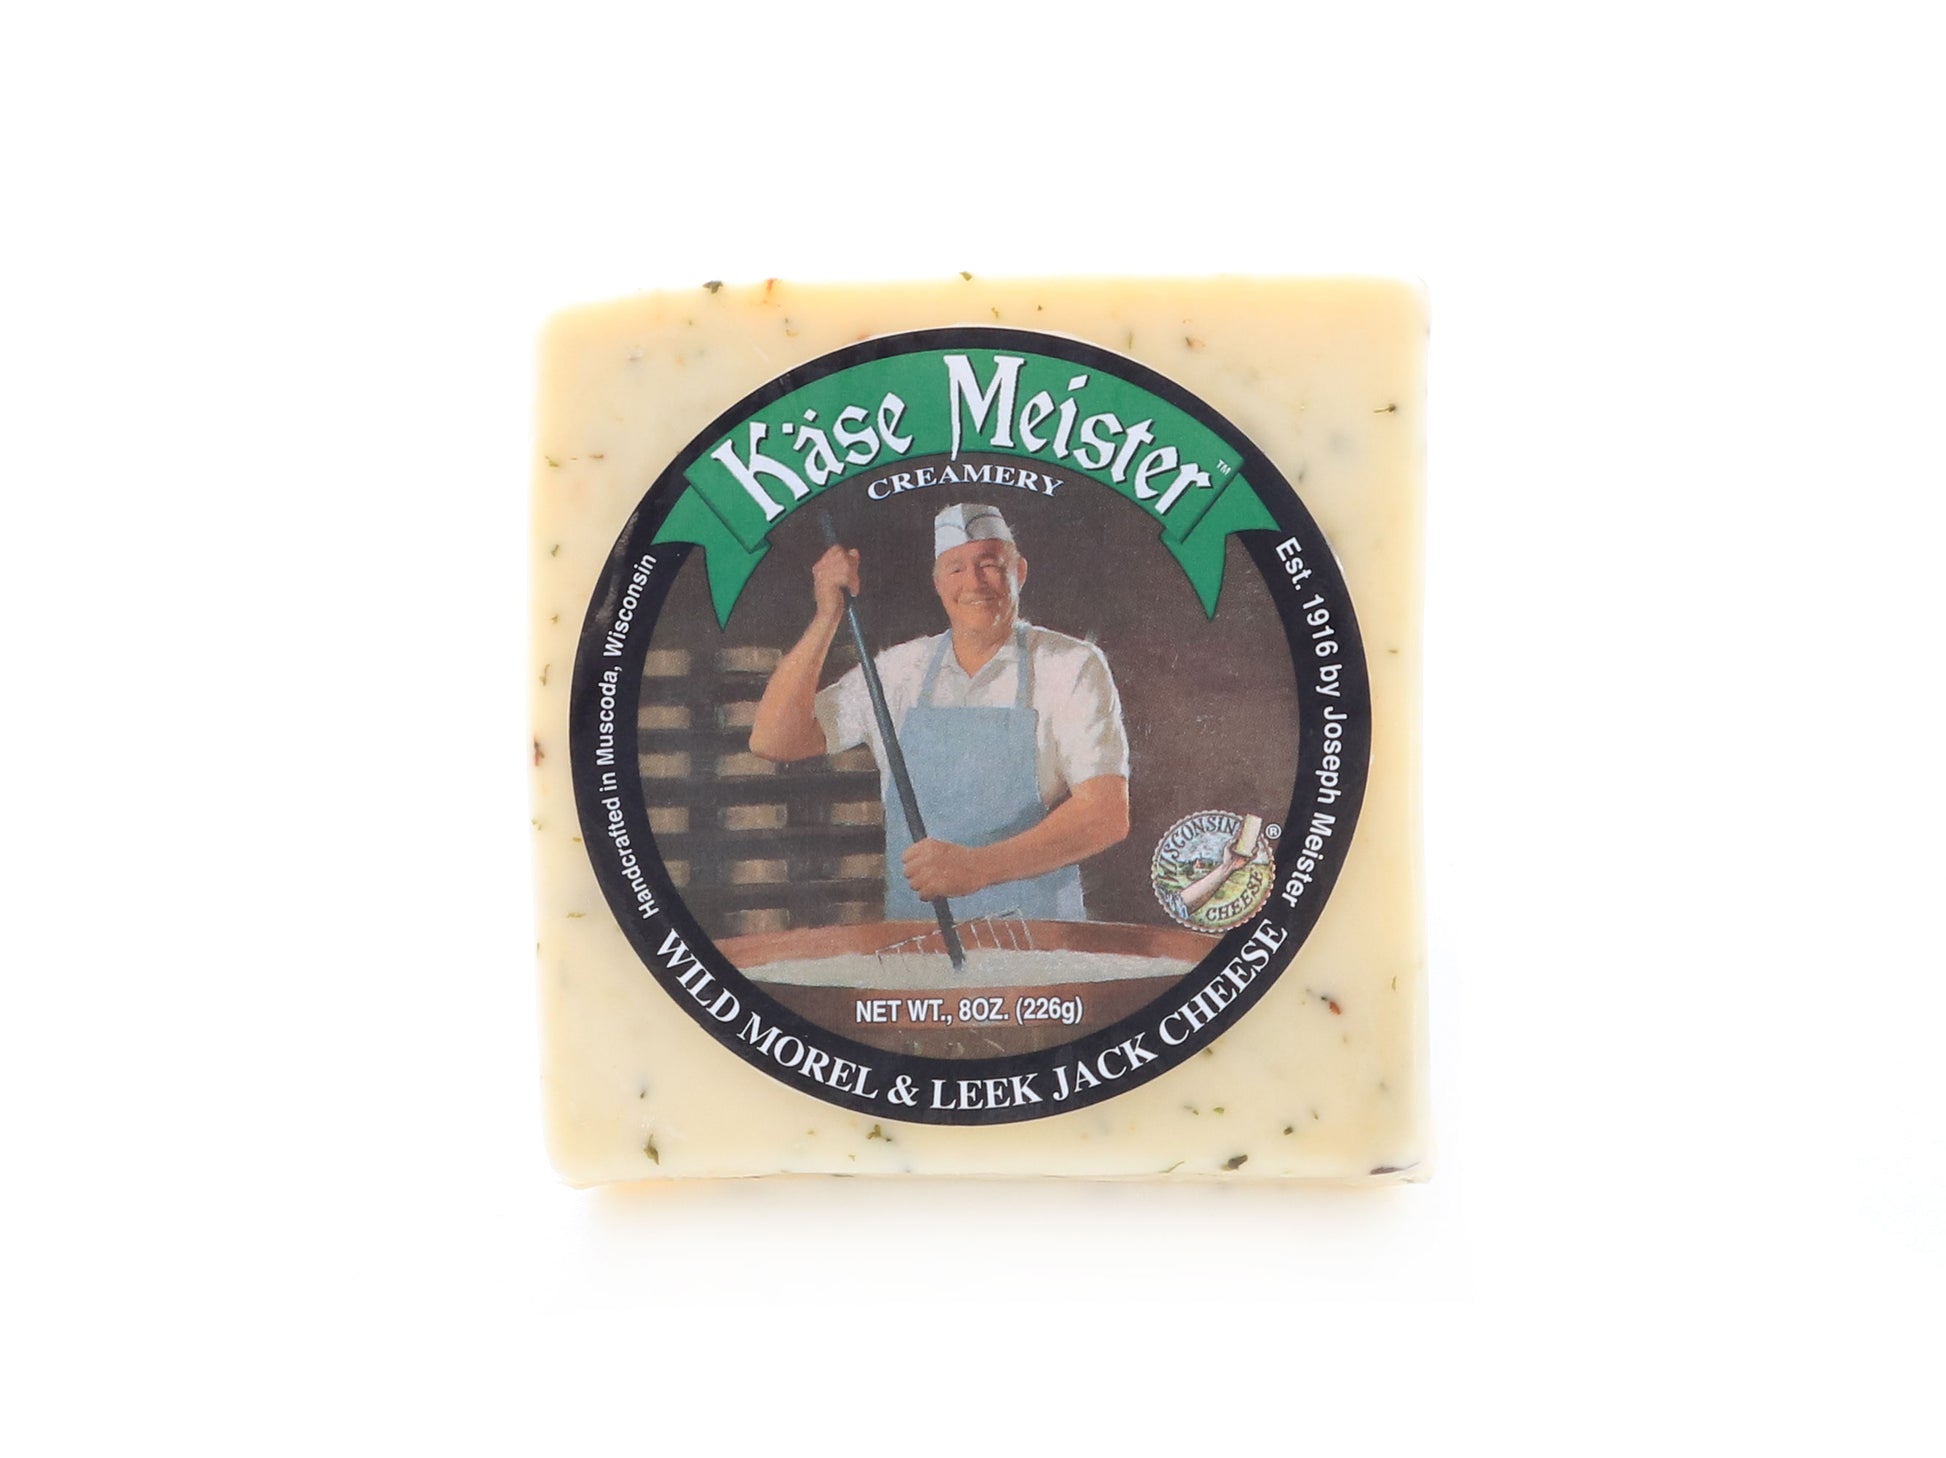 8 ounce piece of monterey jack cheese with wild morel and leek